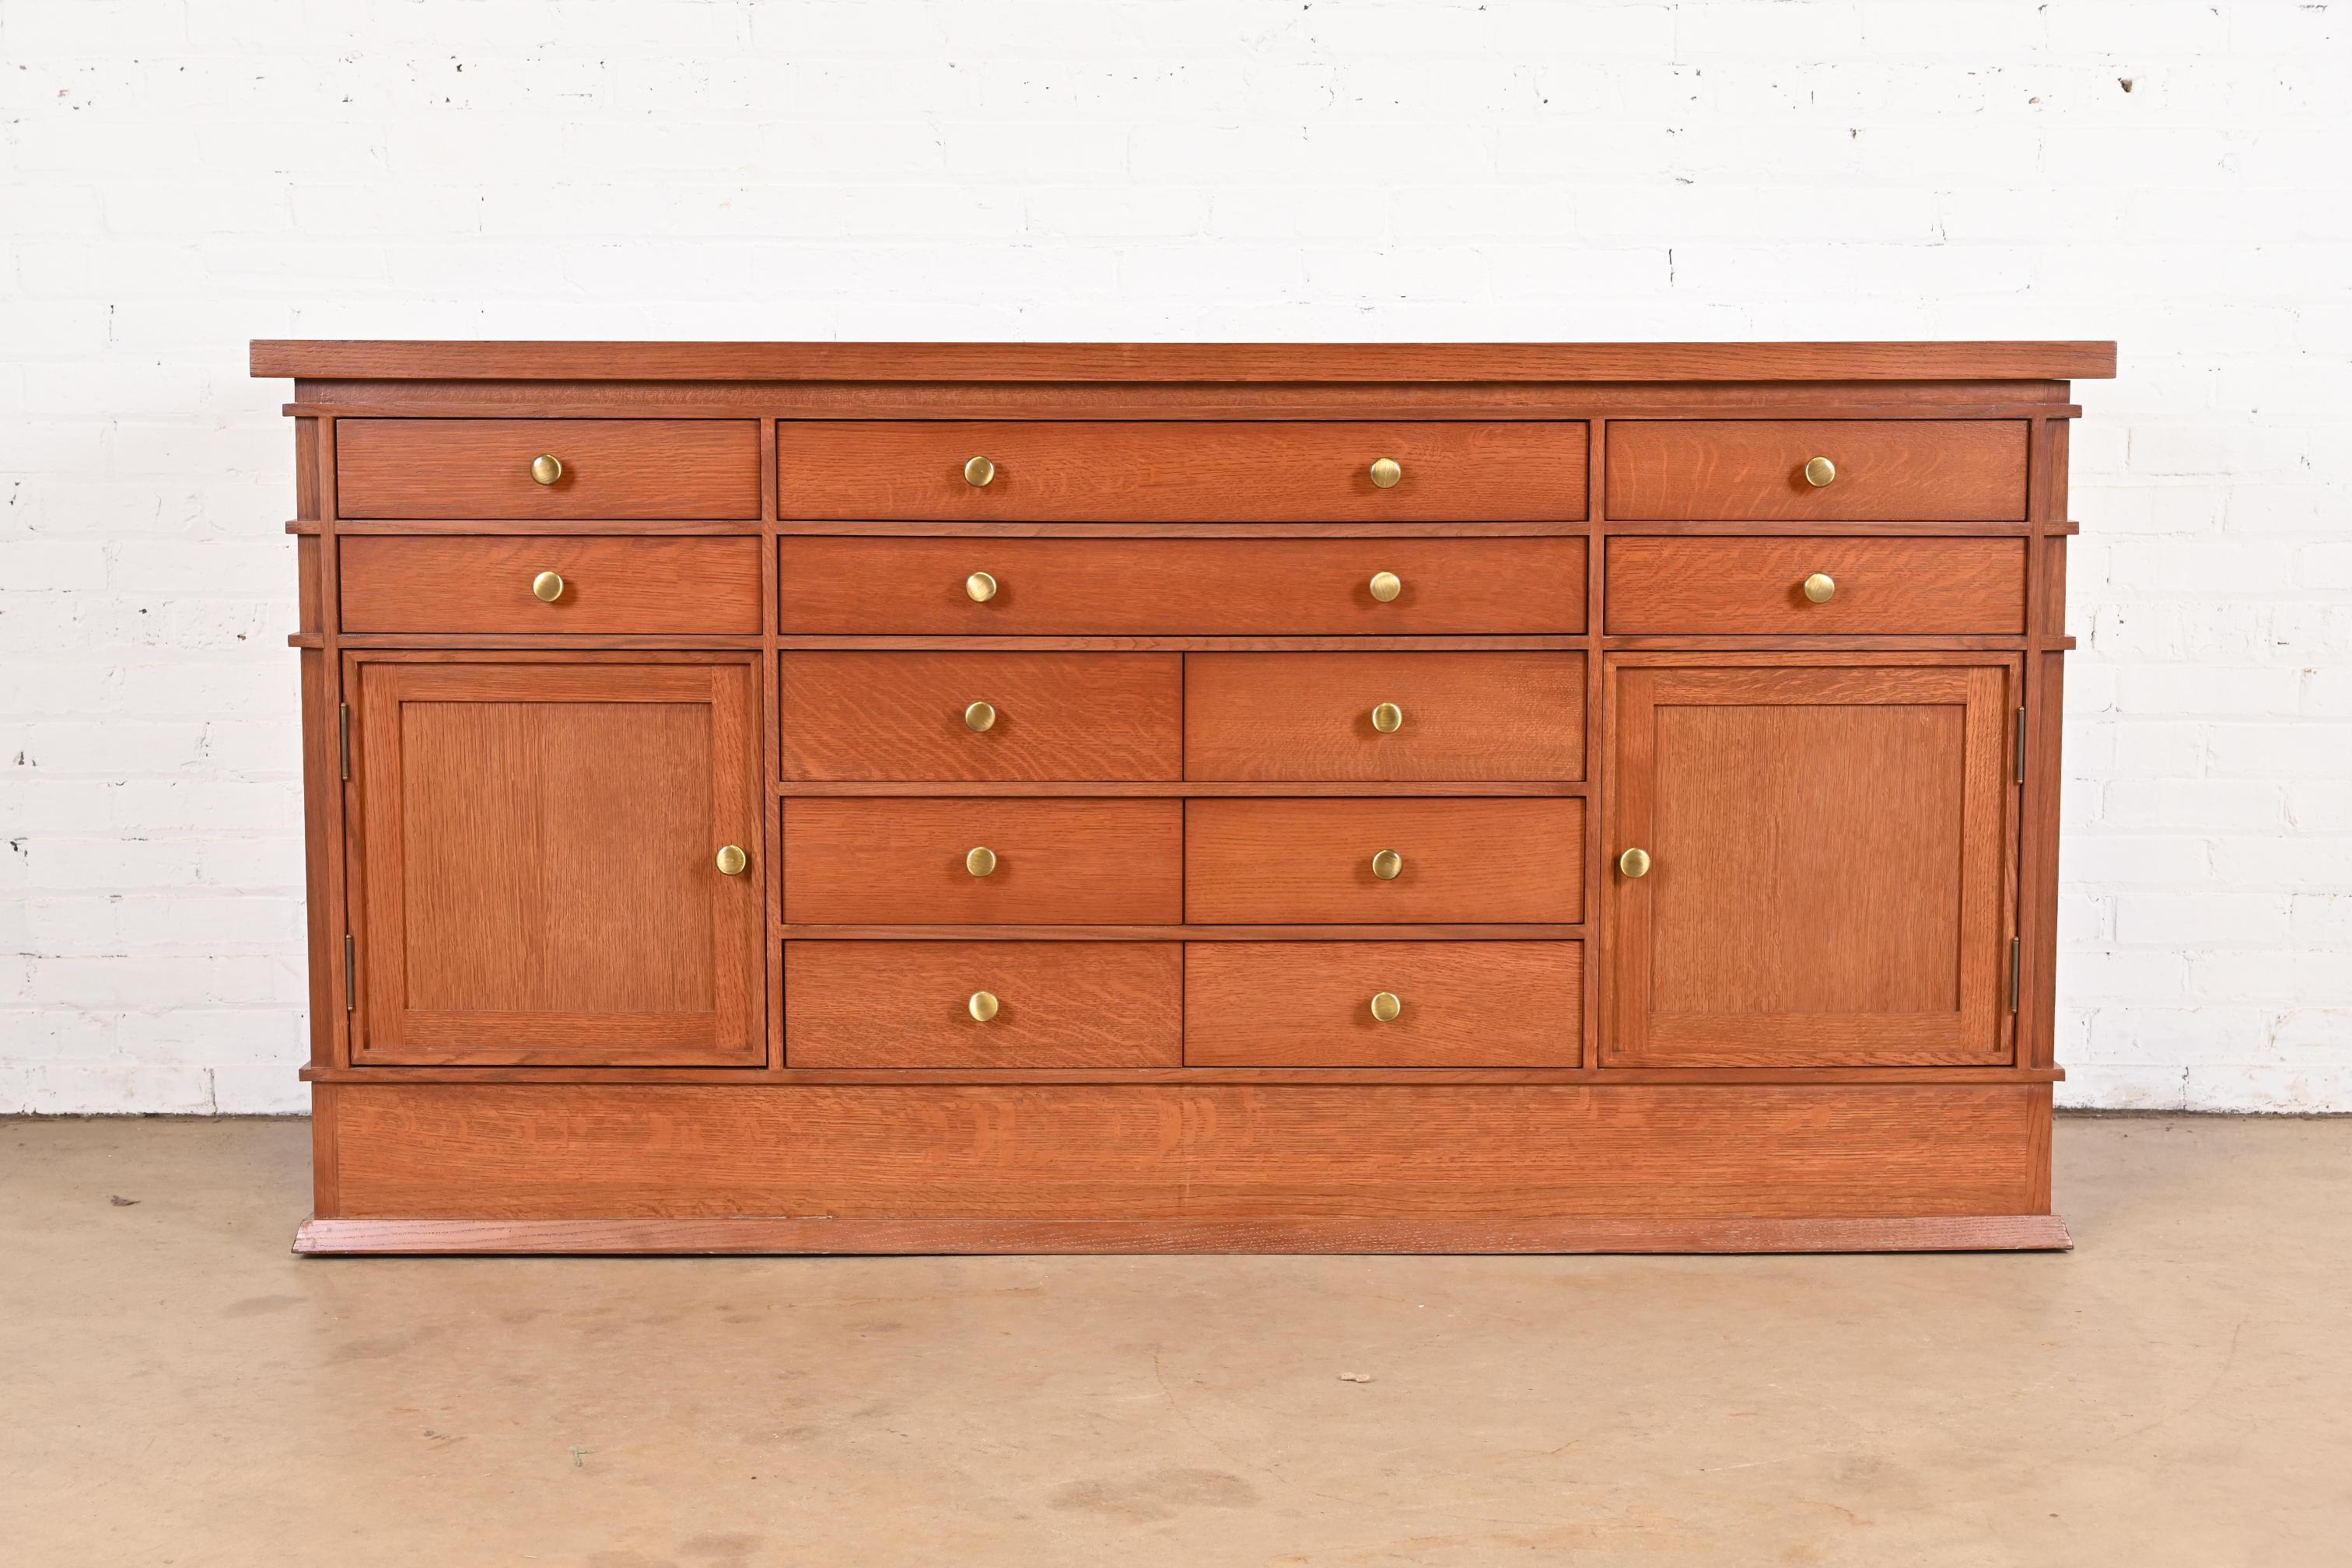 An exceptional Arts & Crafts style sideboard, credenza, or bar cabinet

Originally designed by Frank Lloyd Wright in 1903 for the dining room of Wright's George F. Barton House in Buffalo, New York. Reproduced by Heinz & Co. circa 1985.

Gorgeous